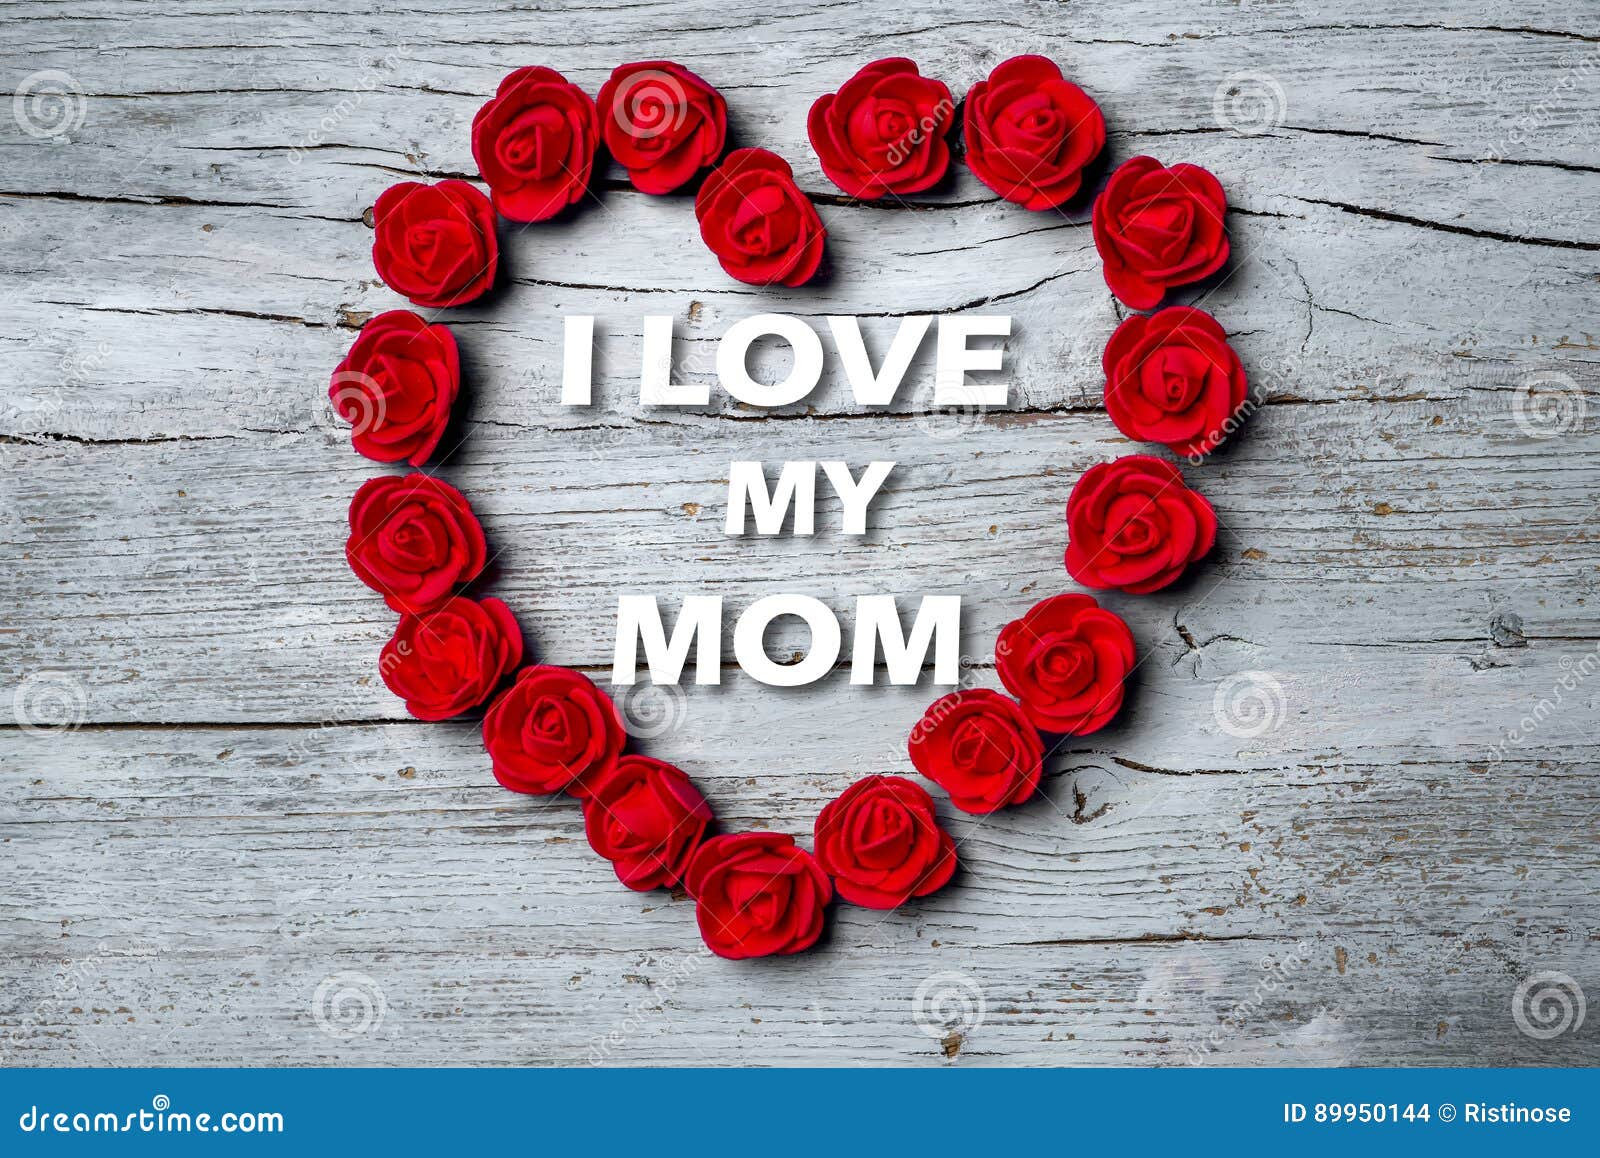 280 I Love My Mom Photos Free Royalty Free Stock Photos From Dreamstime